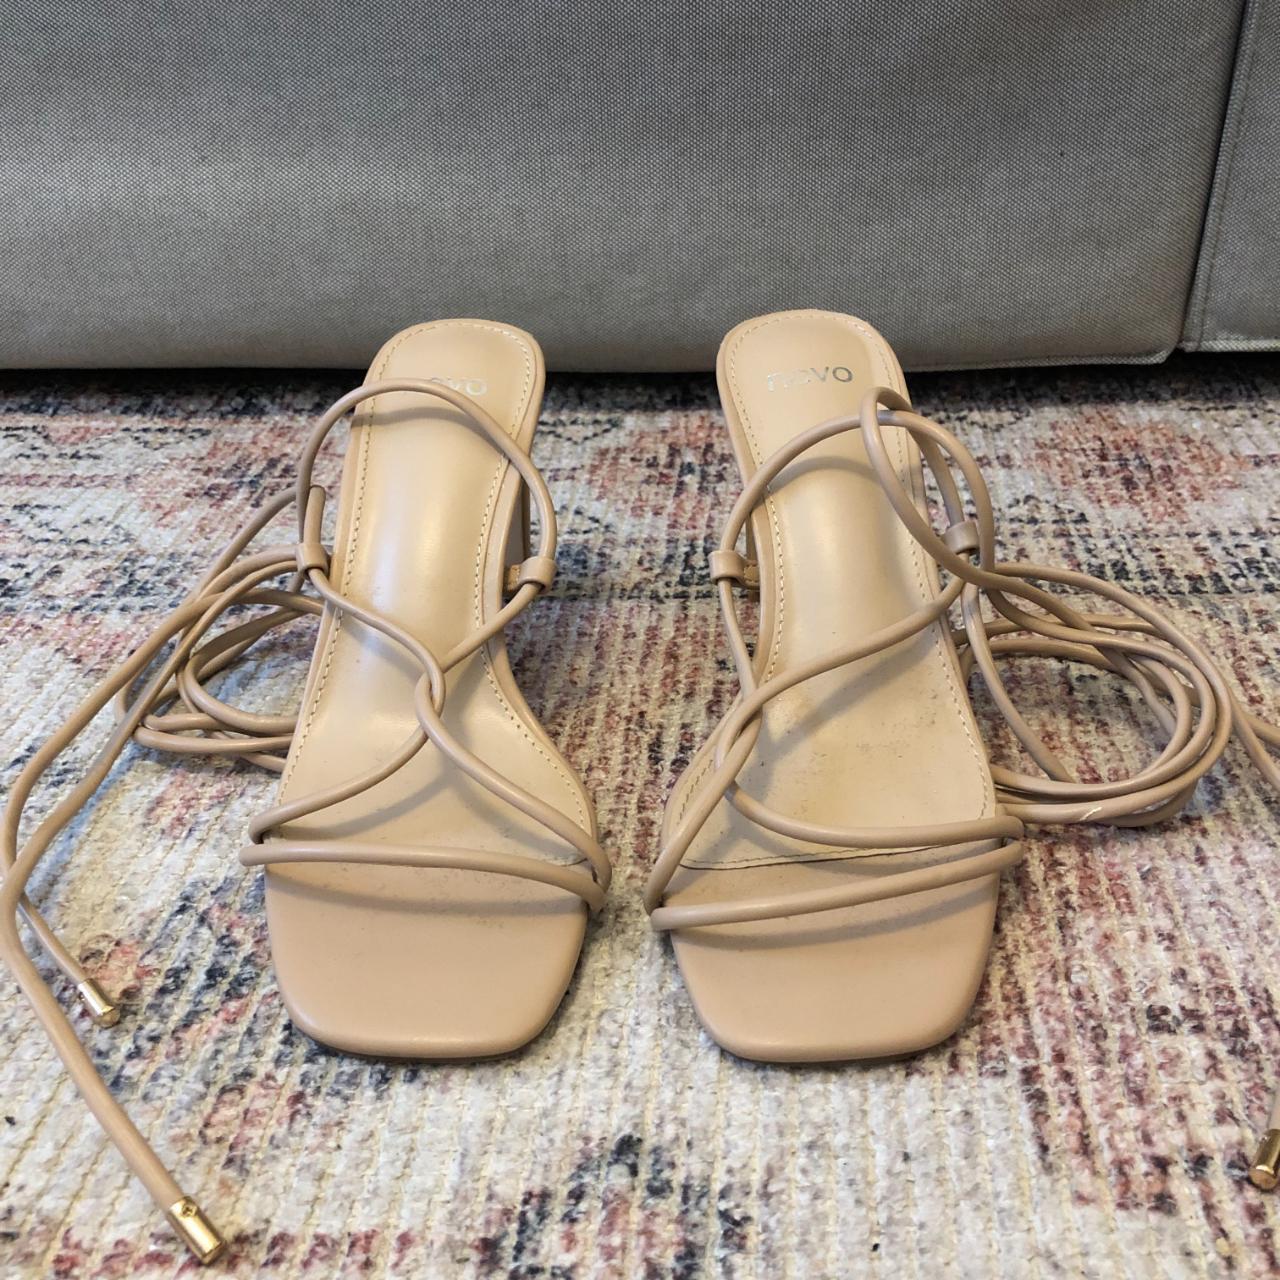 Novo nude lace up heels. These are a super cute... - Depop